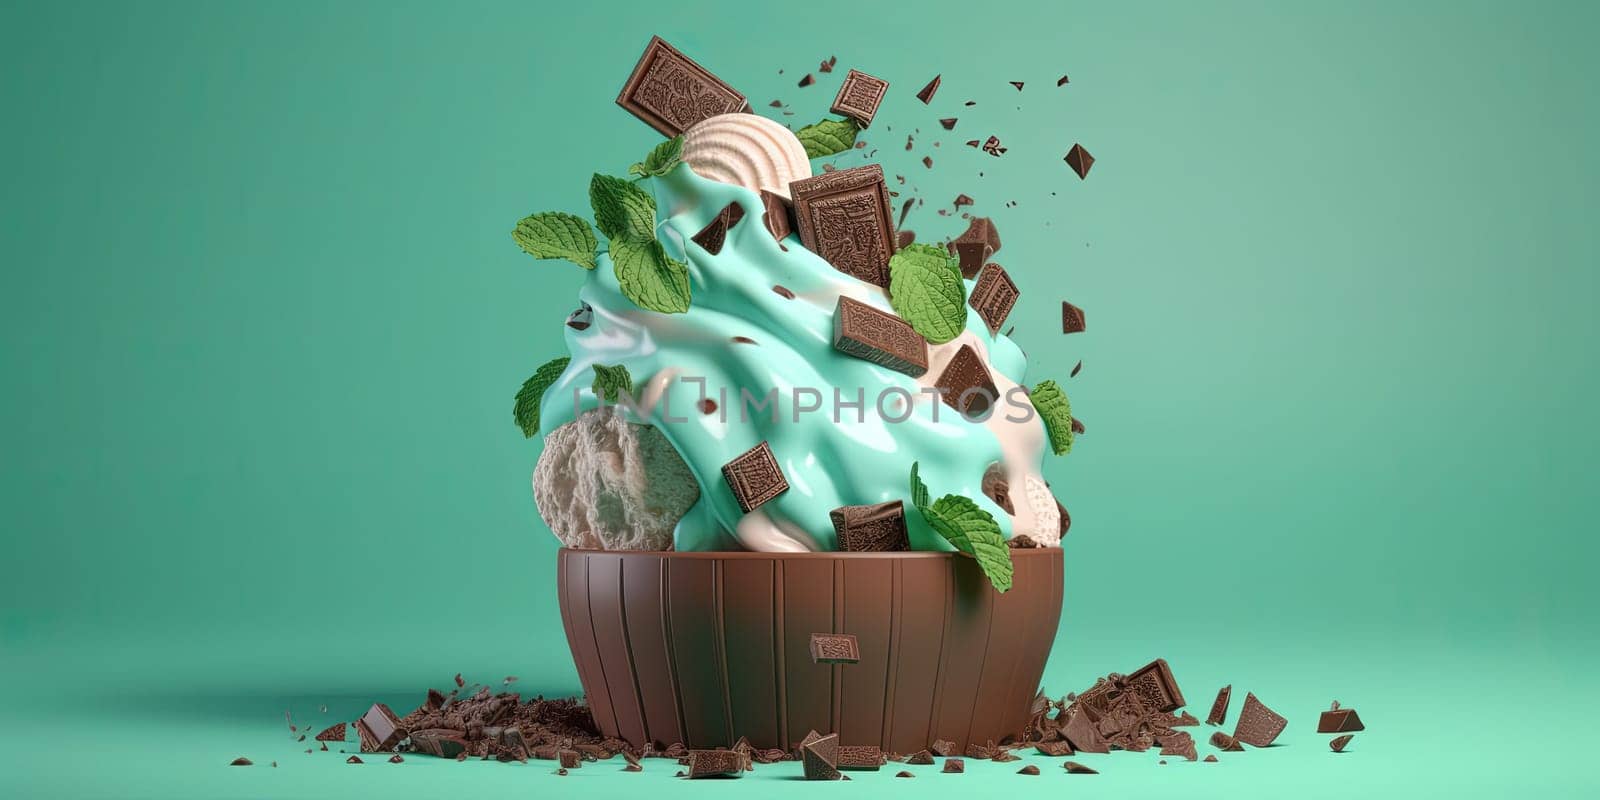 Illustration Of Ice Cream Dessert With The Pistachio And Chocolate On A Mint Background, Dessert In Cafe